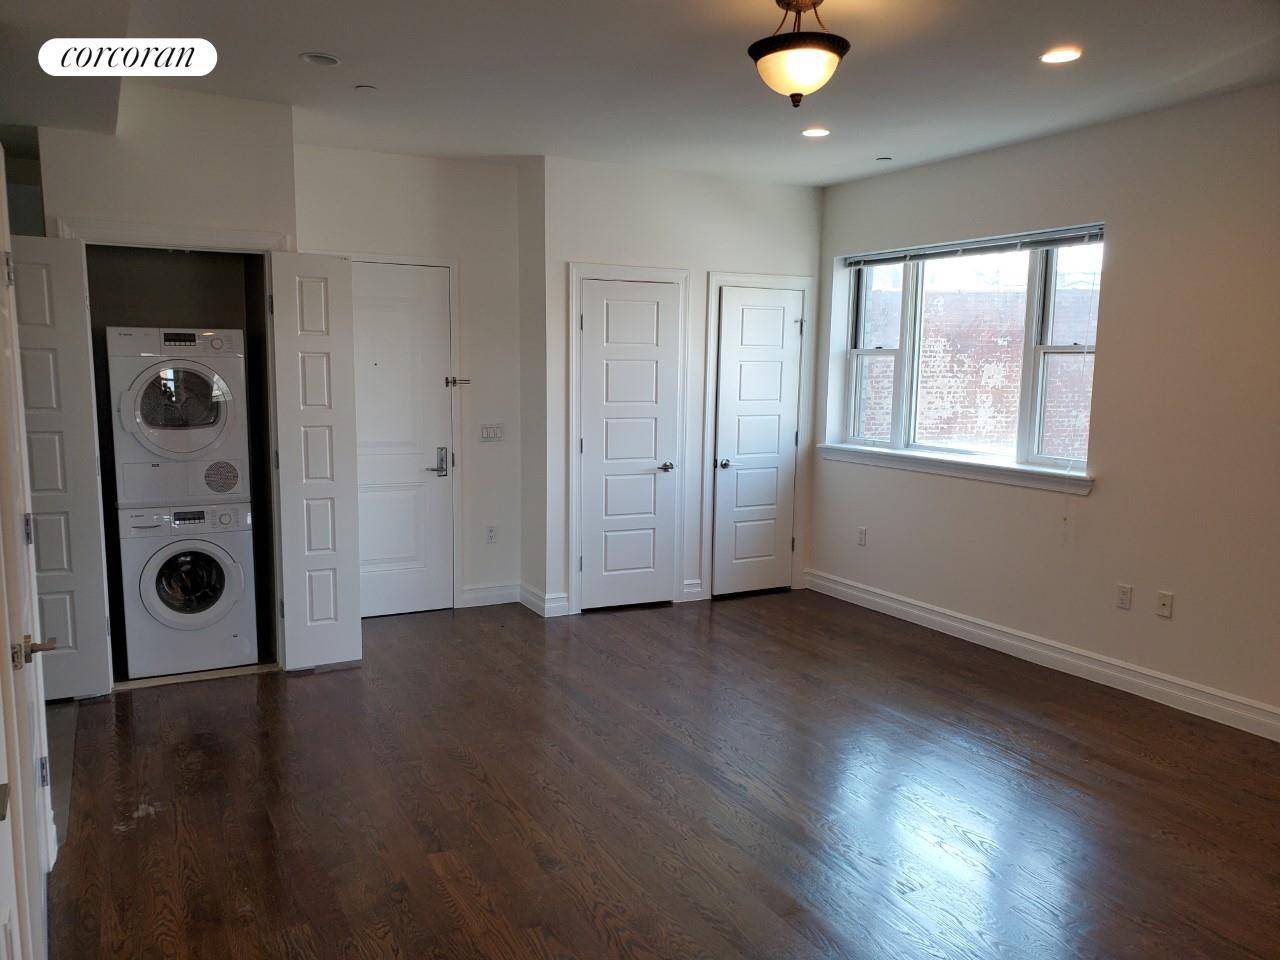 1329 East 17th Street, 4B is a rare find in Midwood Mapleton Kensington, offering the convenience of a washer dryer, central air, and outdoor space.